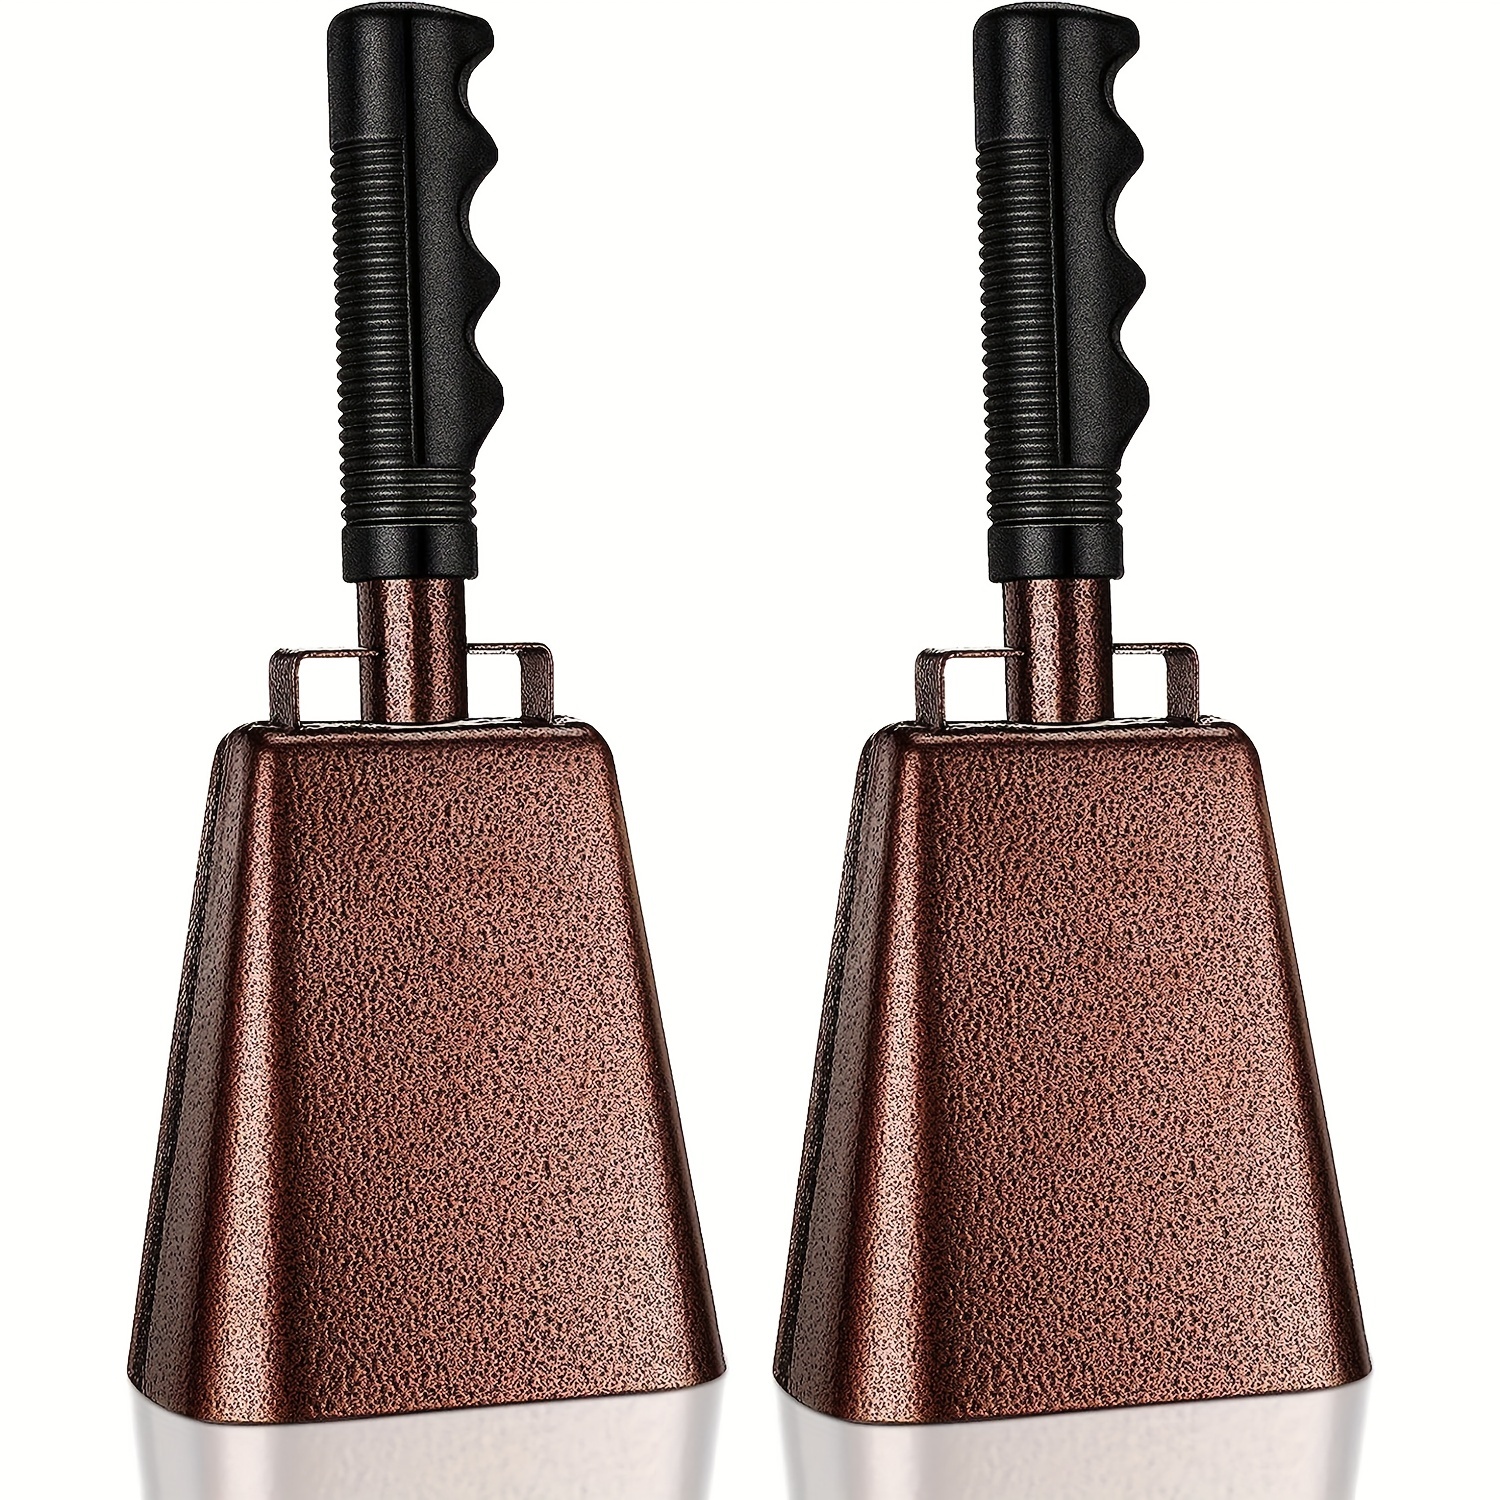  12 Inch Steel Cowbell with Handle Cheering Bell for Sports  Events Large Solid School Bells & Chimes Percussion Musical Instruments  Call Bell Alarm(Copper) : Musical Instruments